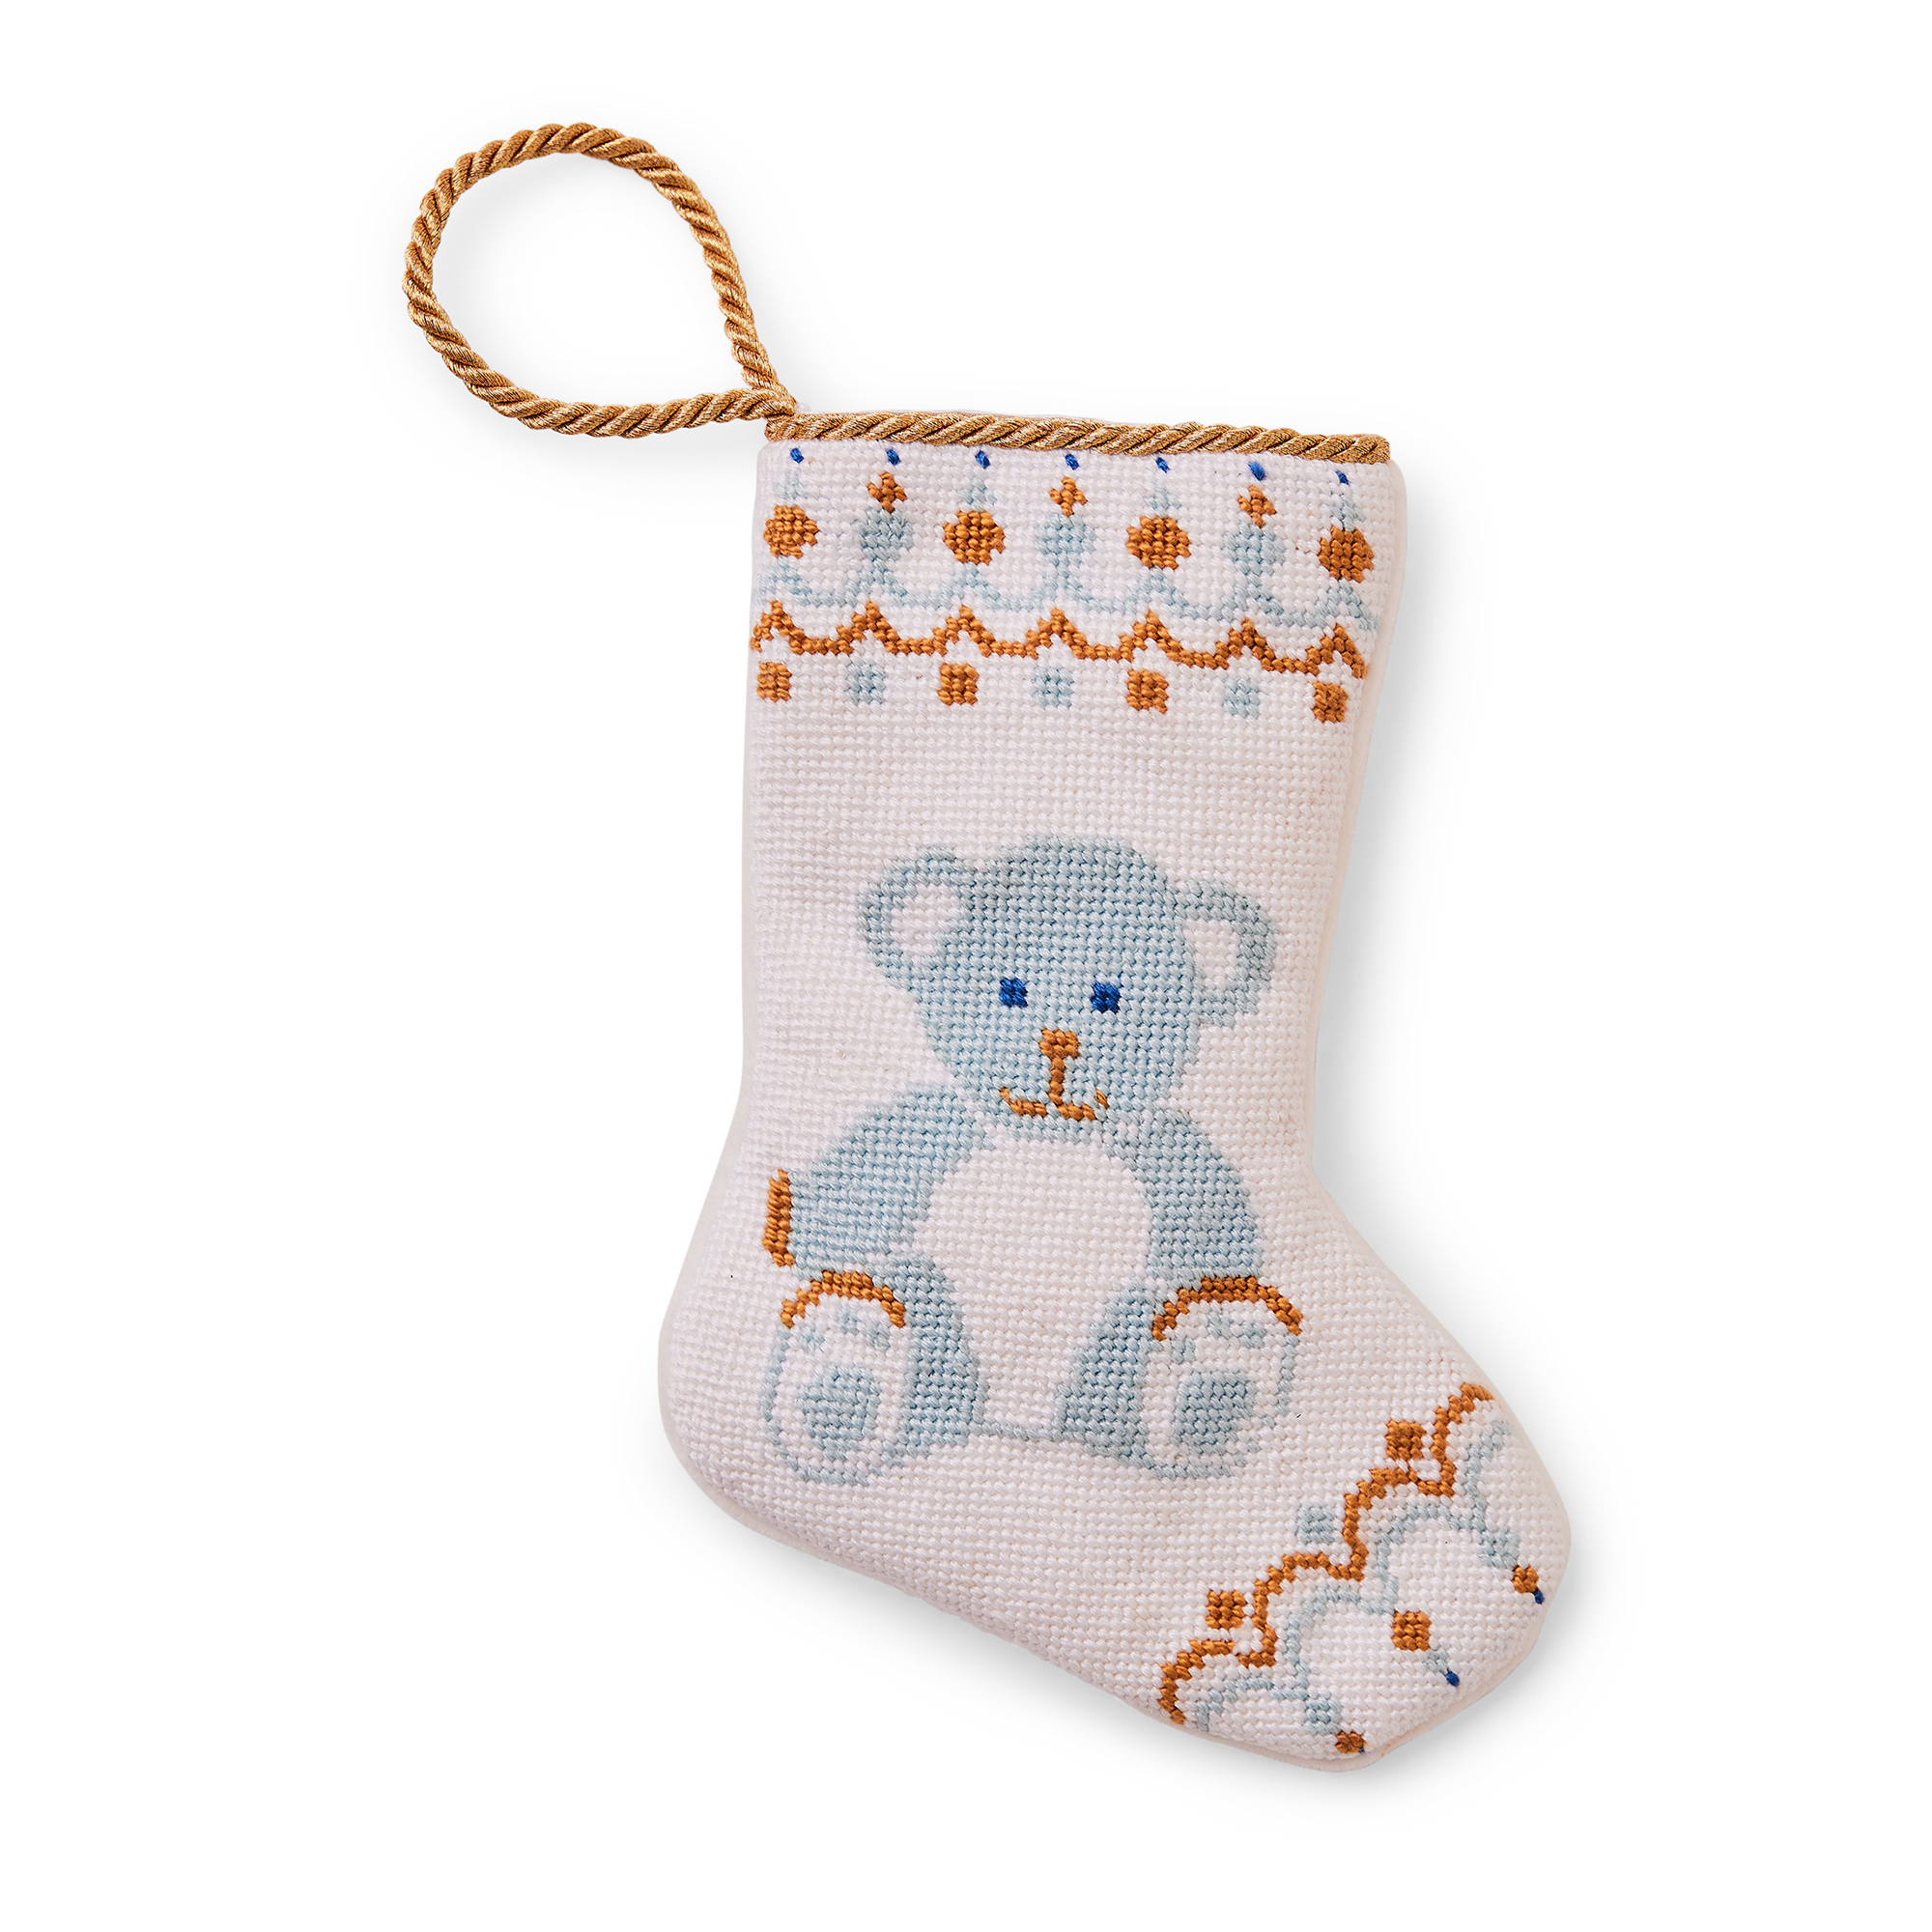 A charming Christmas stocking, Blue Bear enjoying a festive holiday scene. Perfect as tree ornaments, place settings, or hanging by the fireplace.